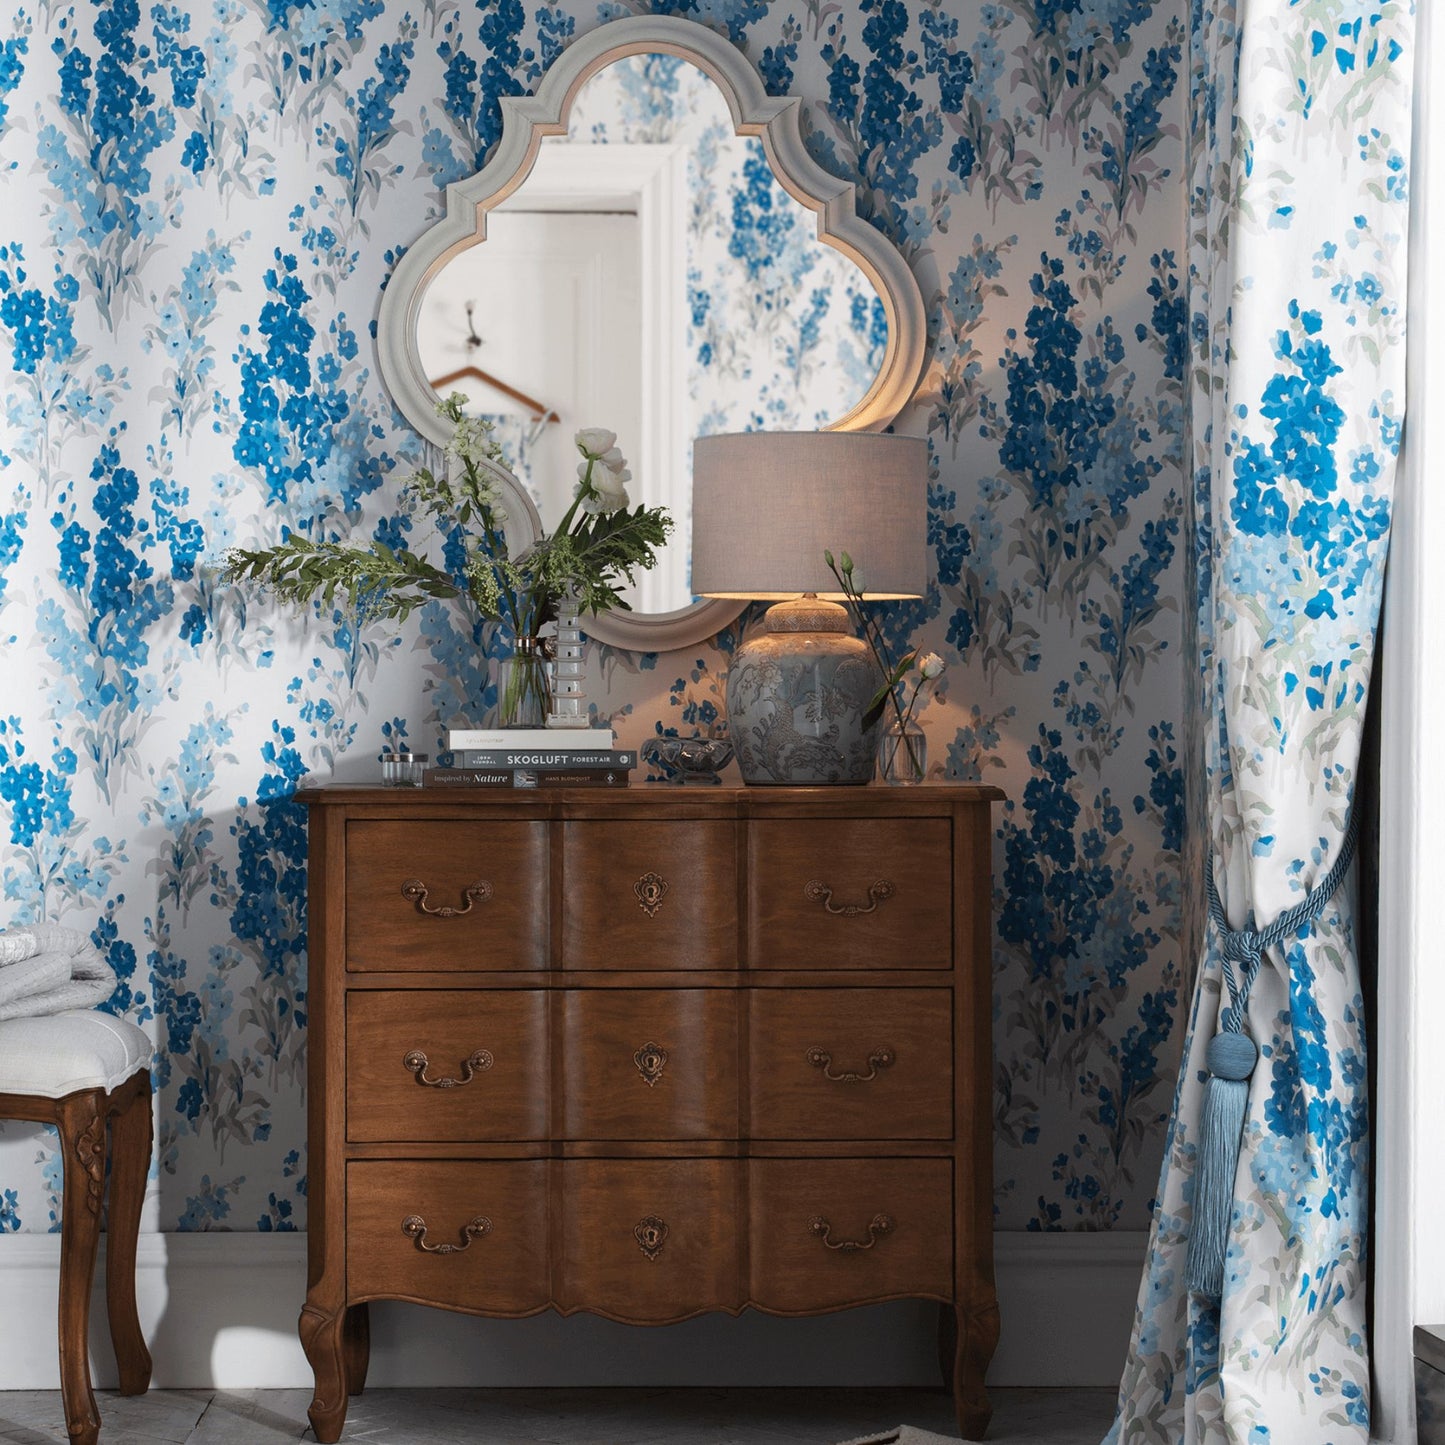 walnut 3 drawer chest styled ina  bedroom featuring blue print wallpaper. Chest is styled with a lamp and vase of flowers with a decorative mirror hanging above it.